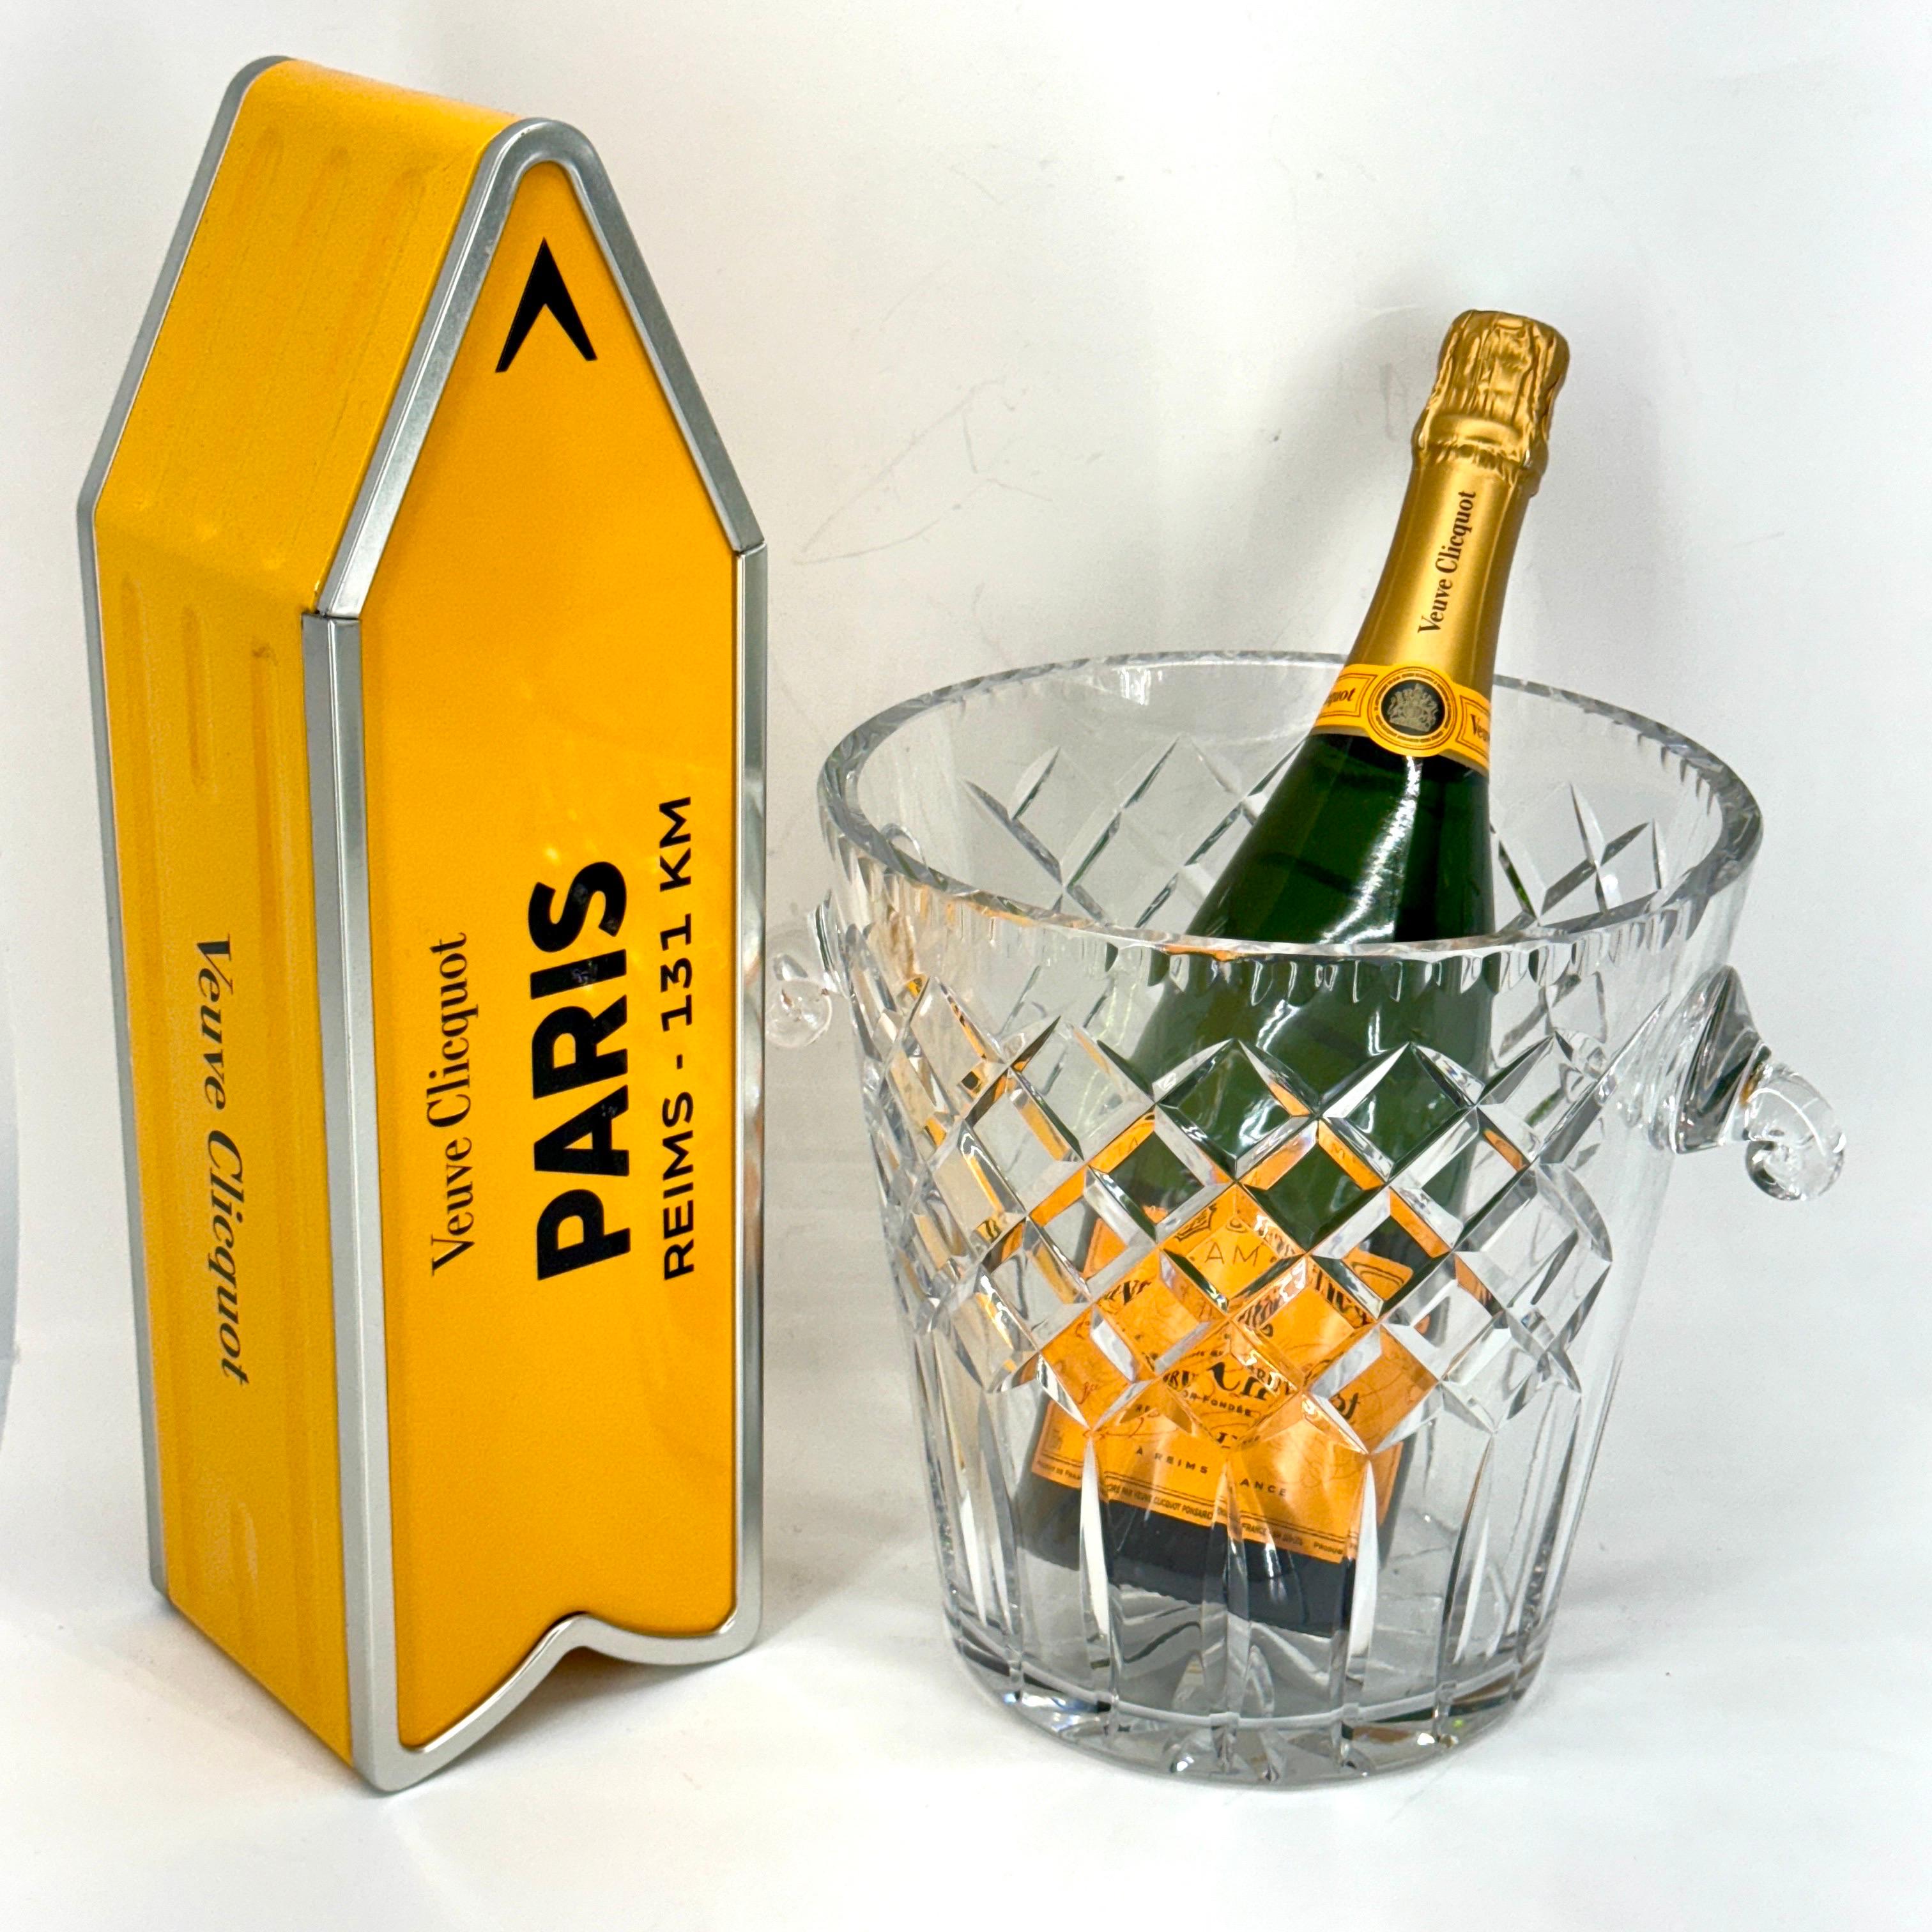 Cut Crystal Ice Champagne Bucket Wine Cooler, France

This classic pattern is a stunning combination of brilliance and clarity, characterized by the diamond and wedge cut crystal. The crisp coolness of ice and the brilliant clarity of crystal meet